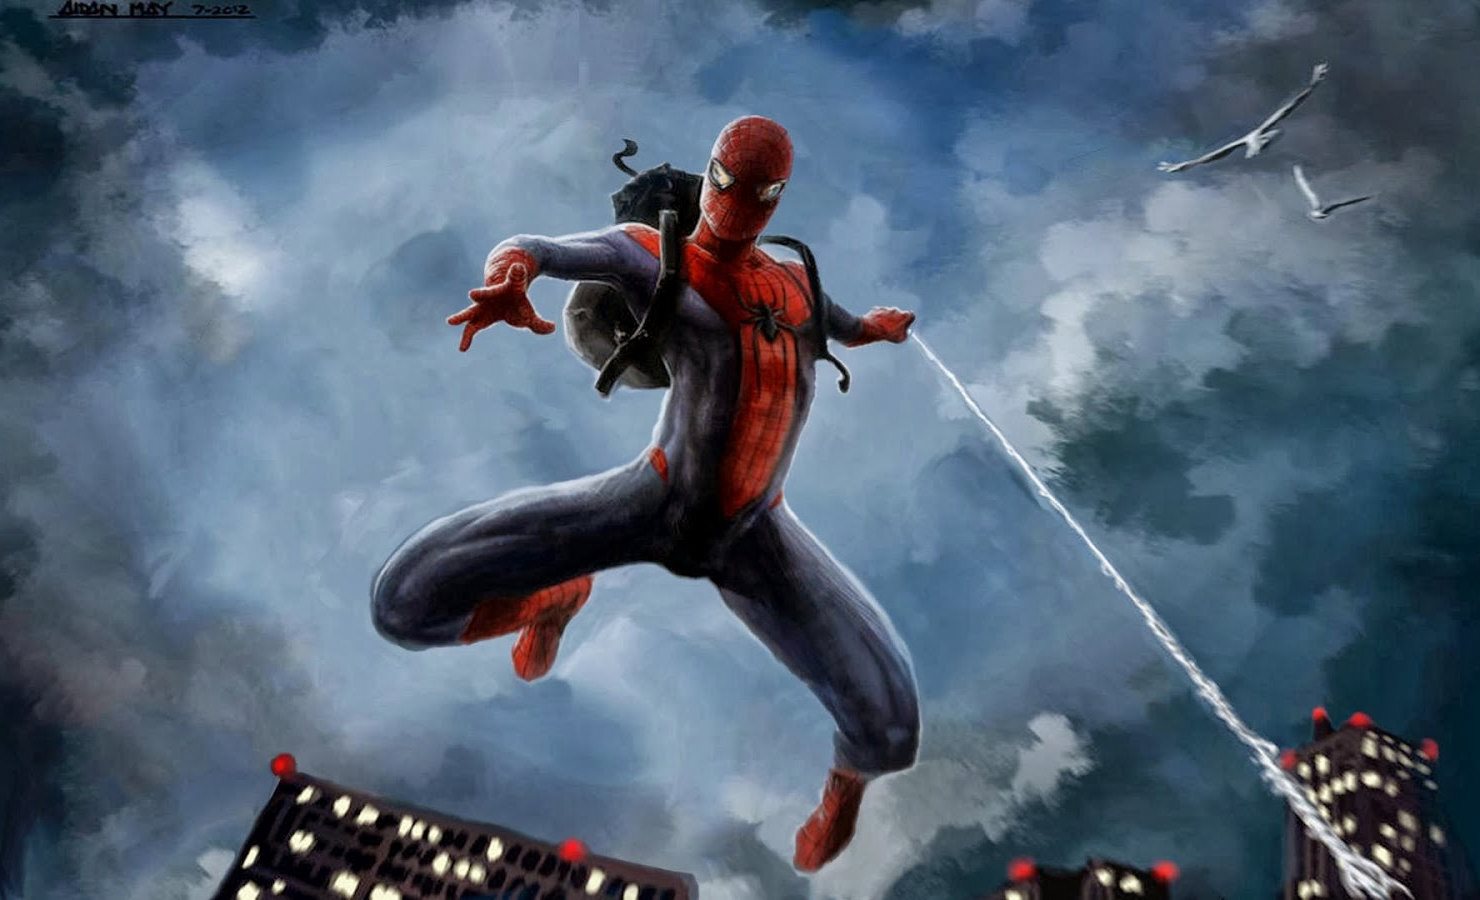 super heros hd wallpaper,fictional character,superhero,action adventure game,extreme sport,spider man